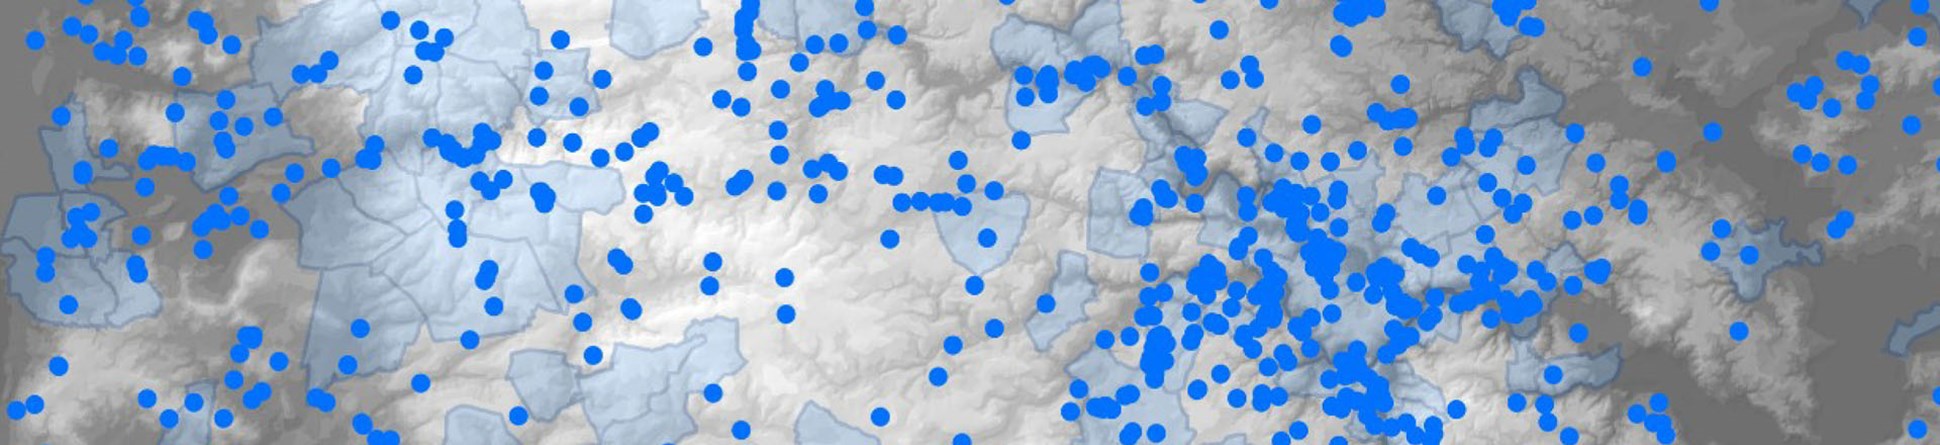 Extract from distribution map of Norfolk find-spots as blue dots on a stylised background